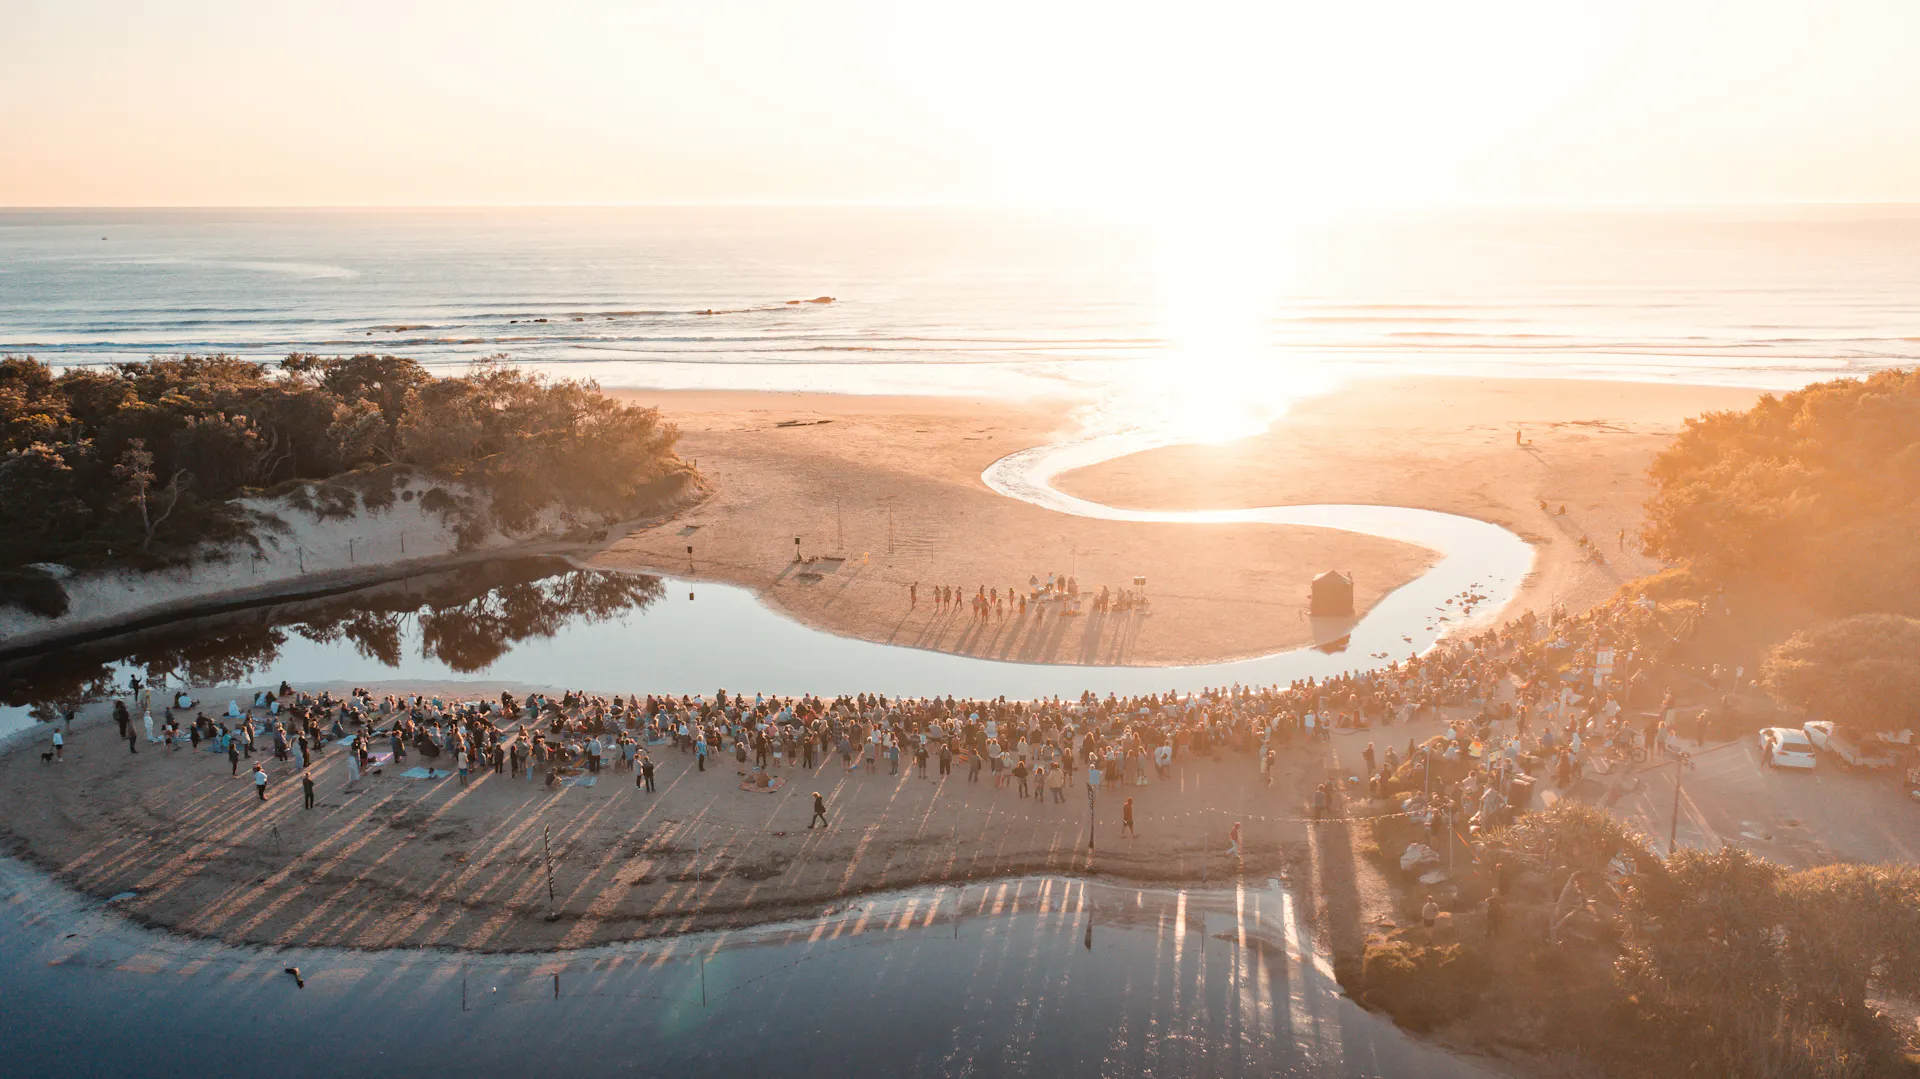 Aerial view of people gathered on a beach watching a performance at dawn